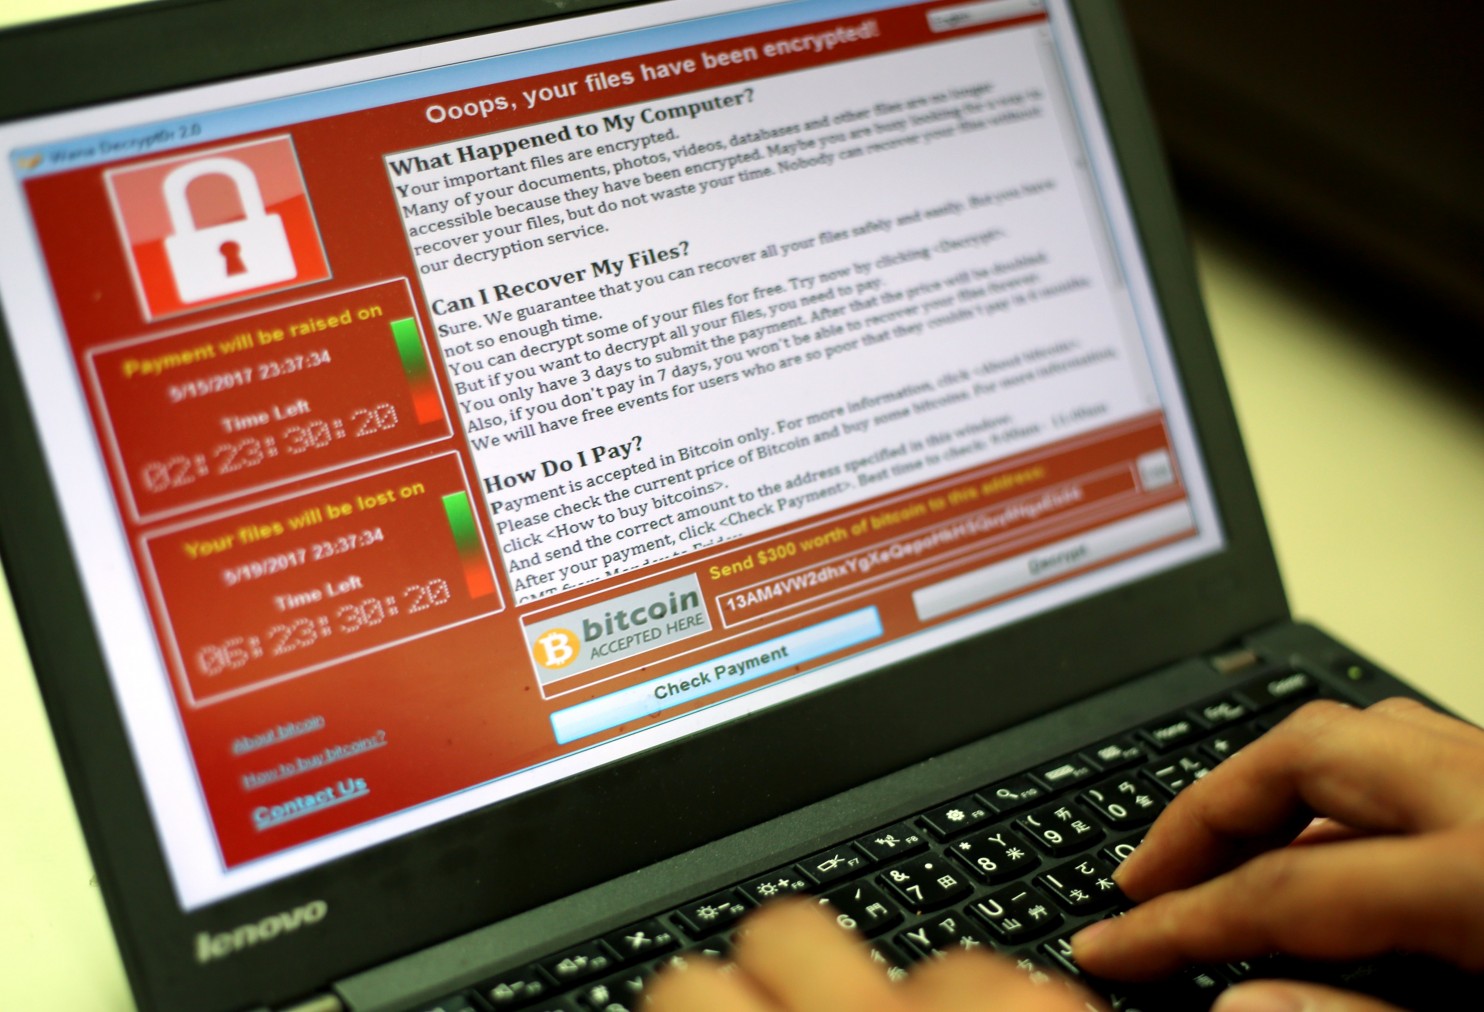 A programmer in Taipei shows a sample of a ransomware attack.